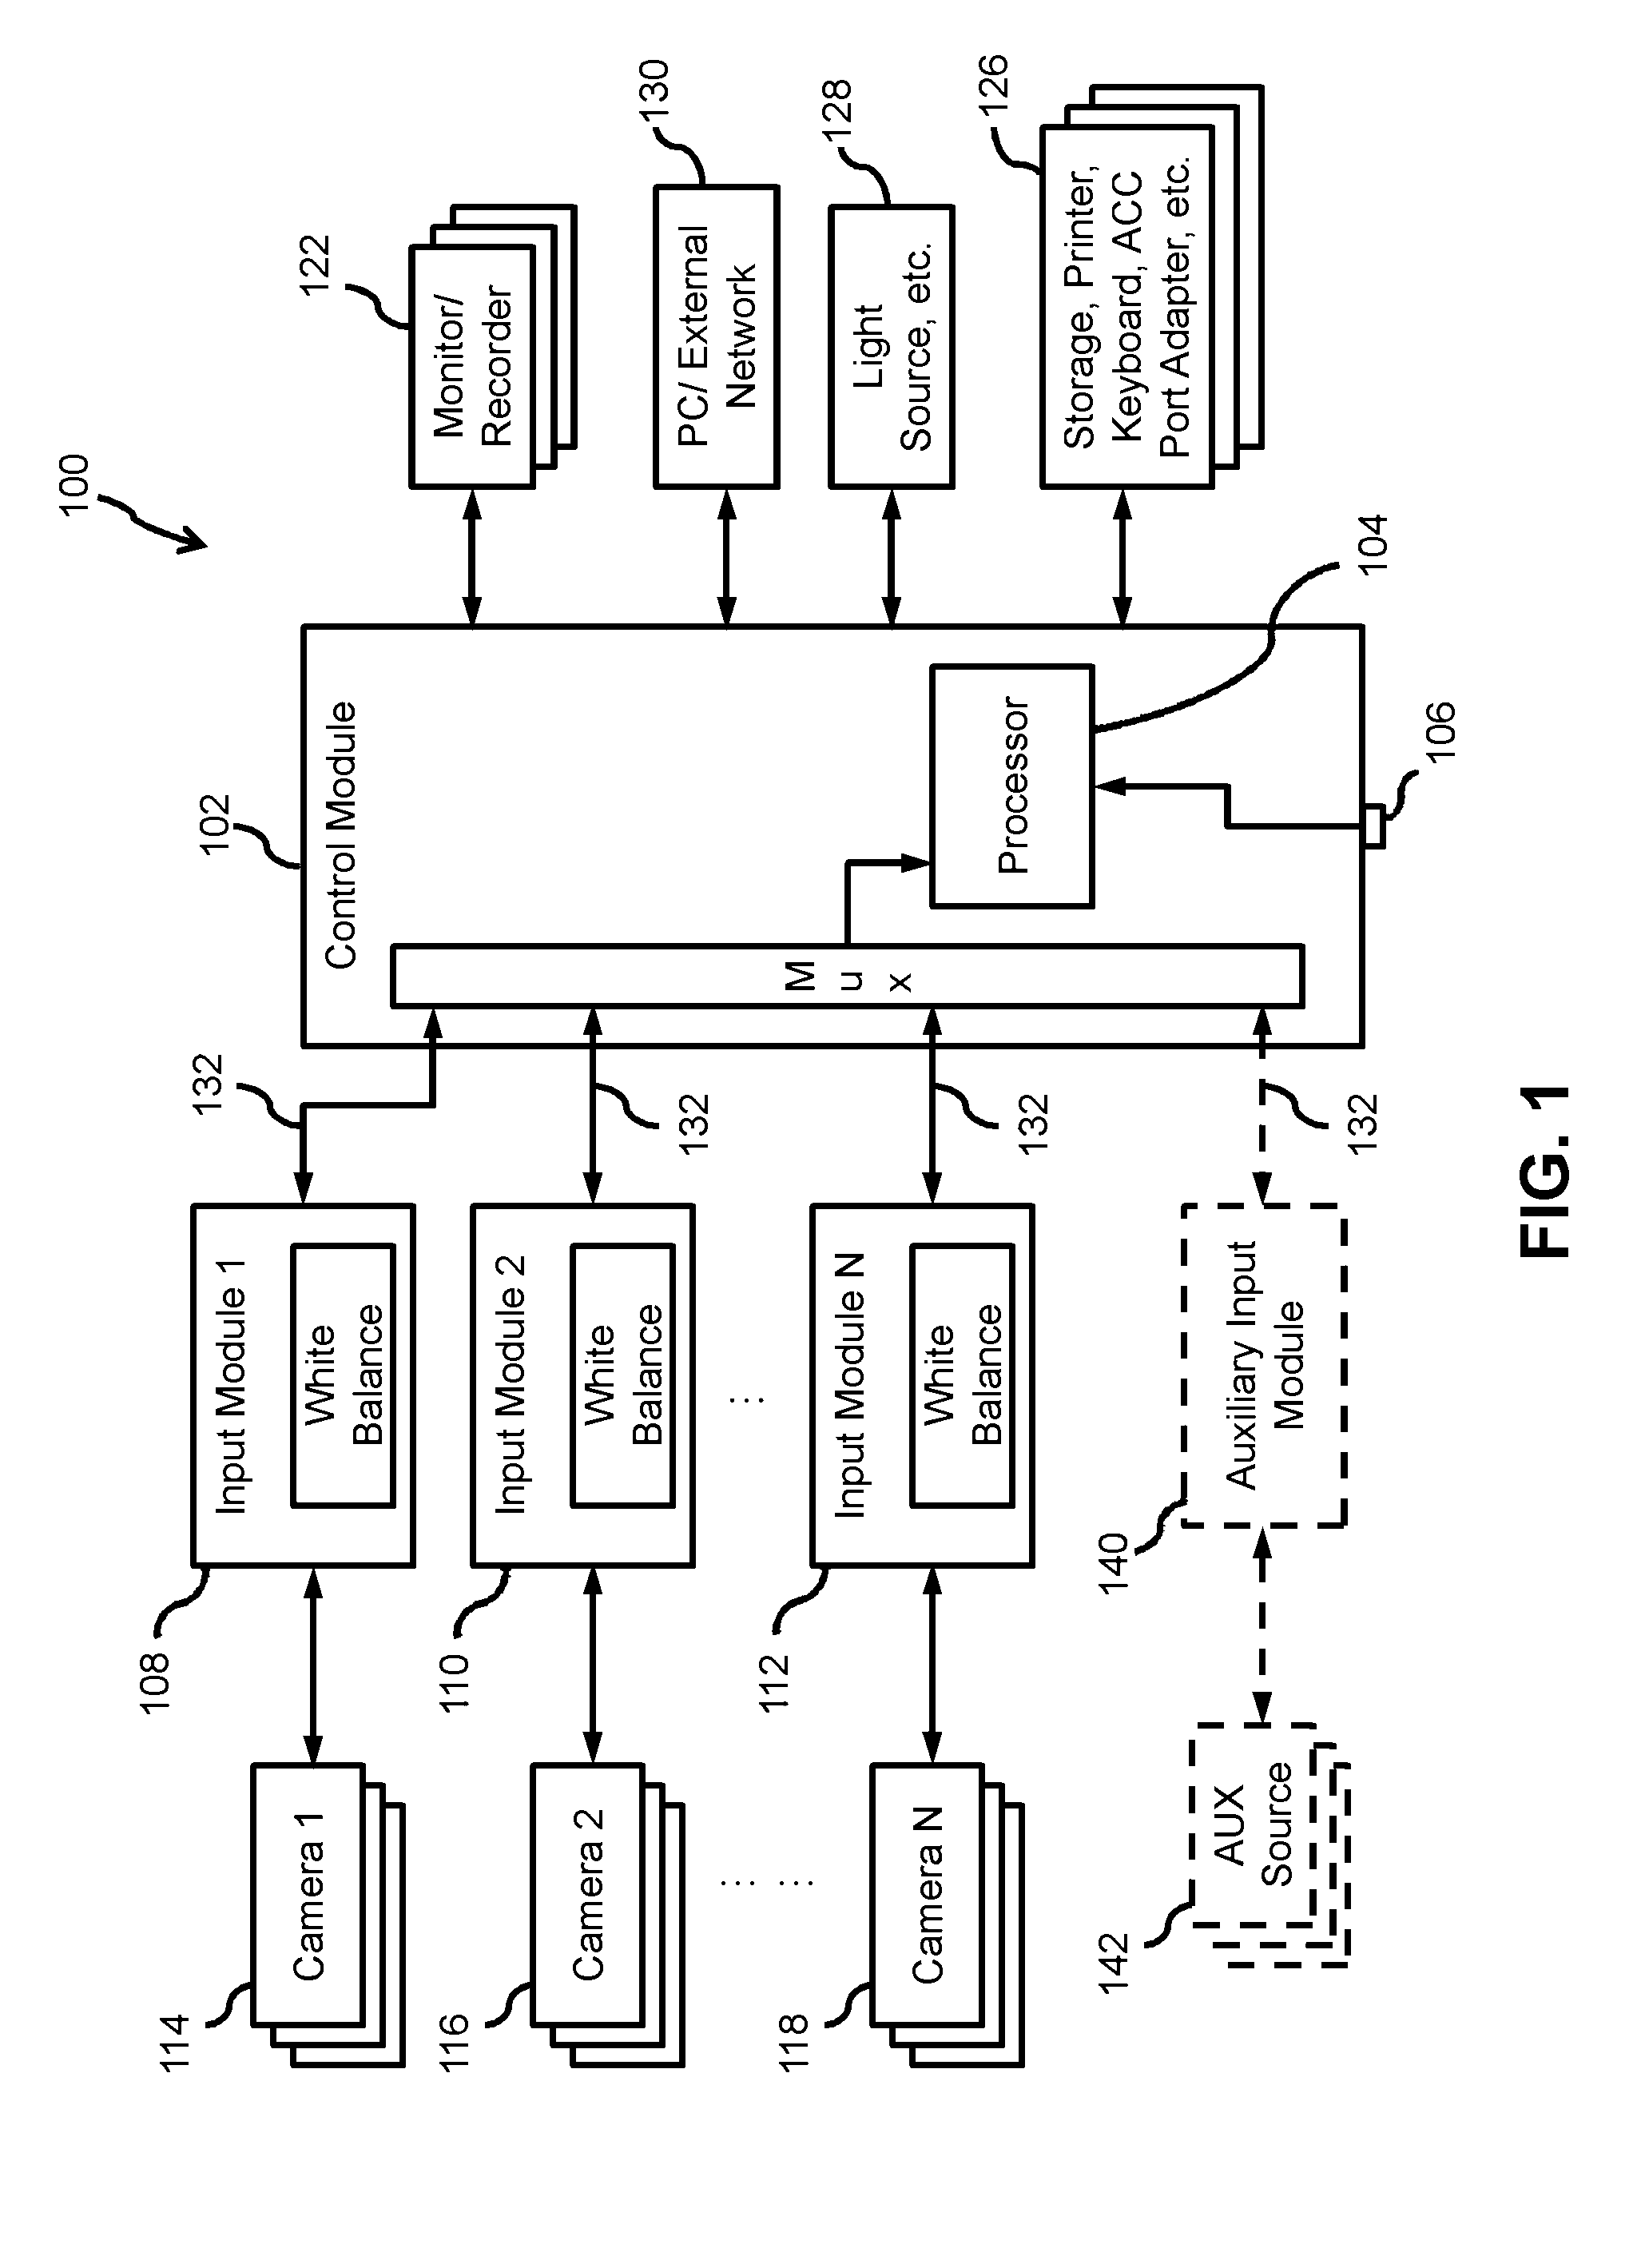 Video Imaging System With Multiple Camera White Balance Capability